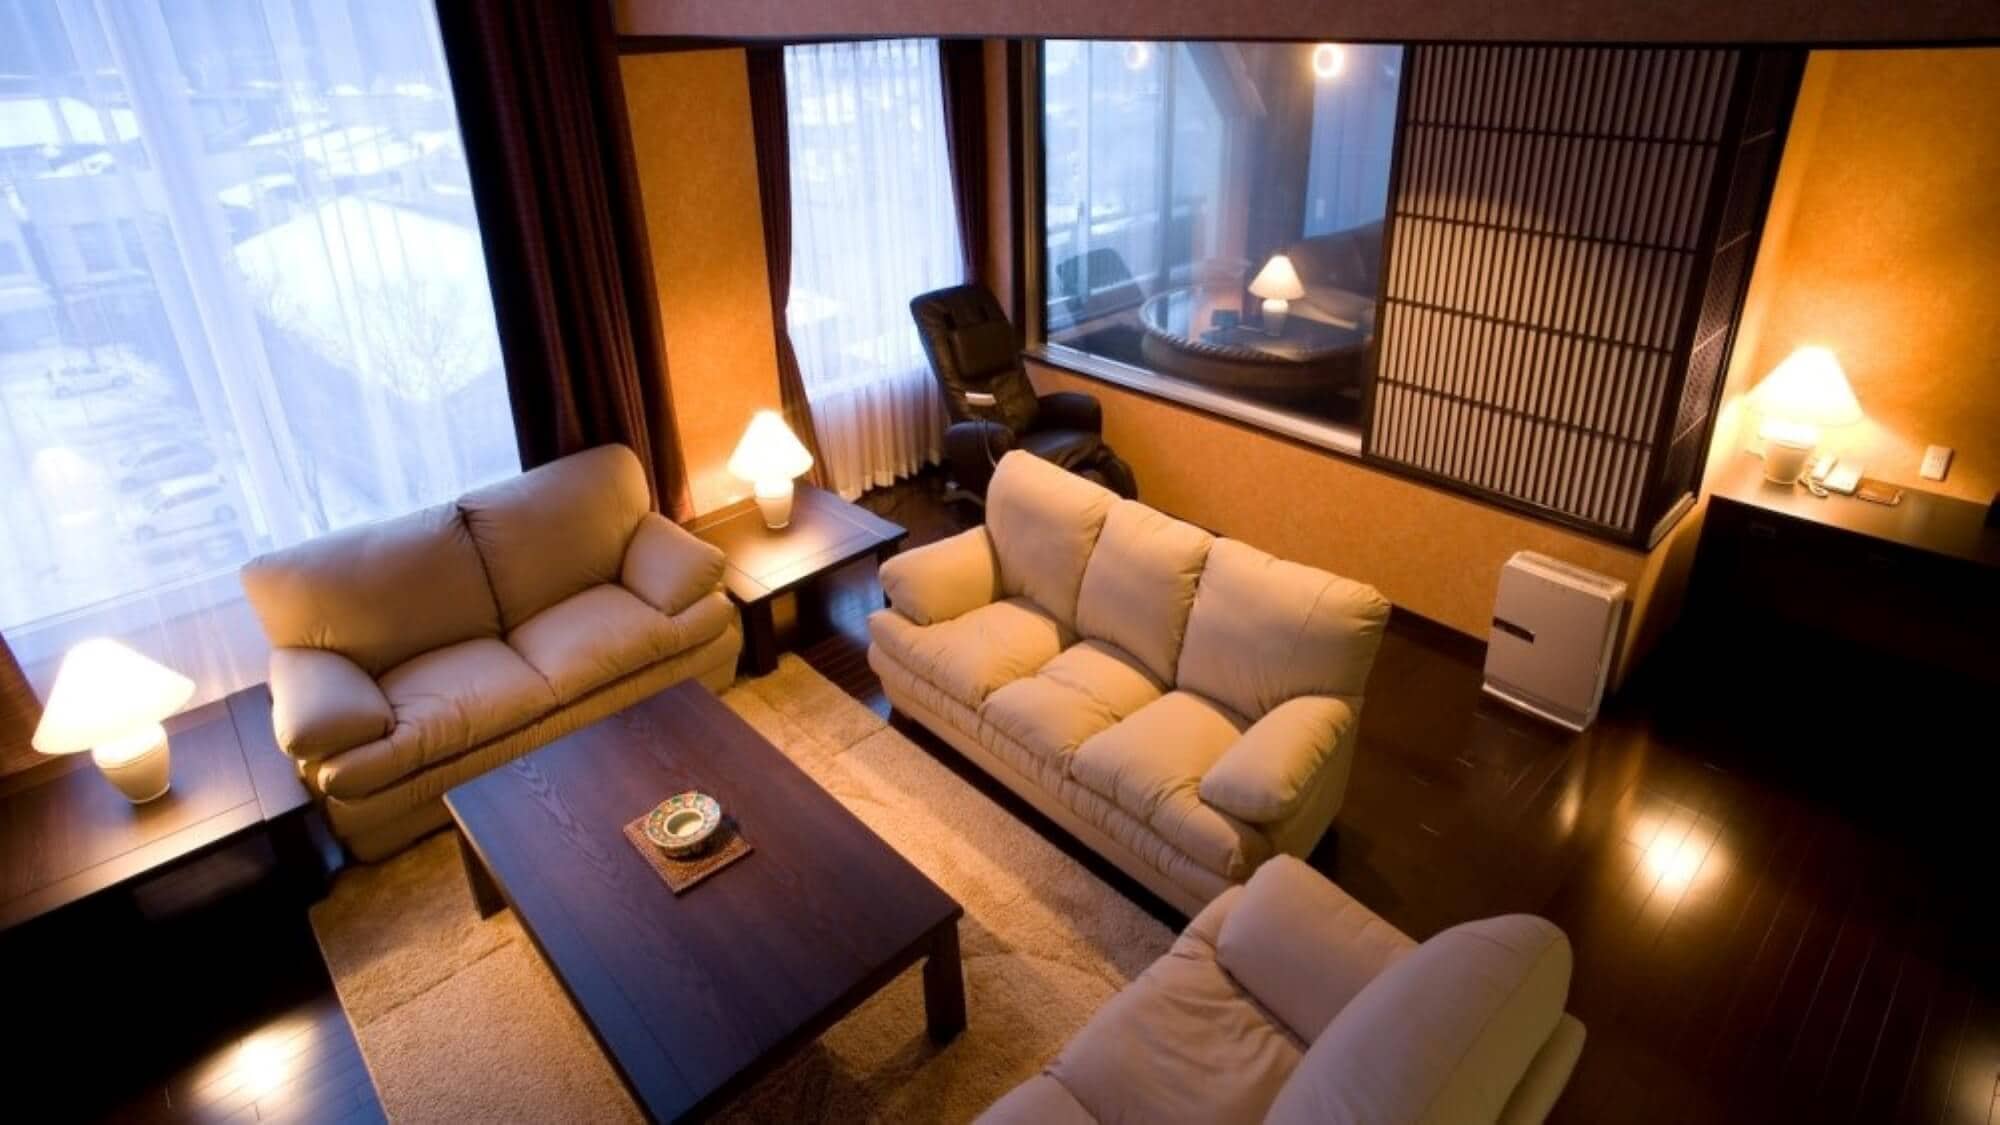 West Wing [New Wing] VIP room living room * The guest room open-air bath is not a hot spring. Please note.